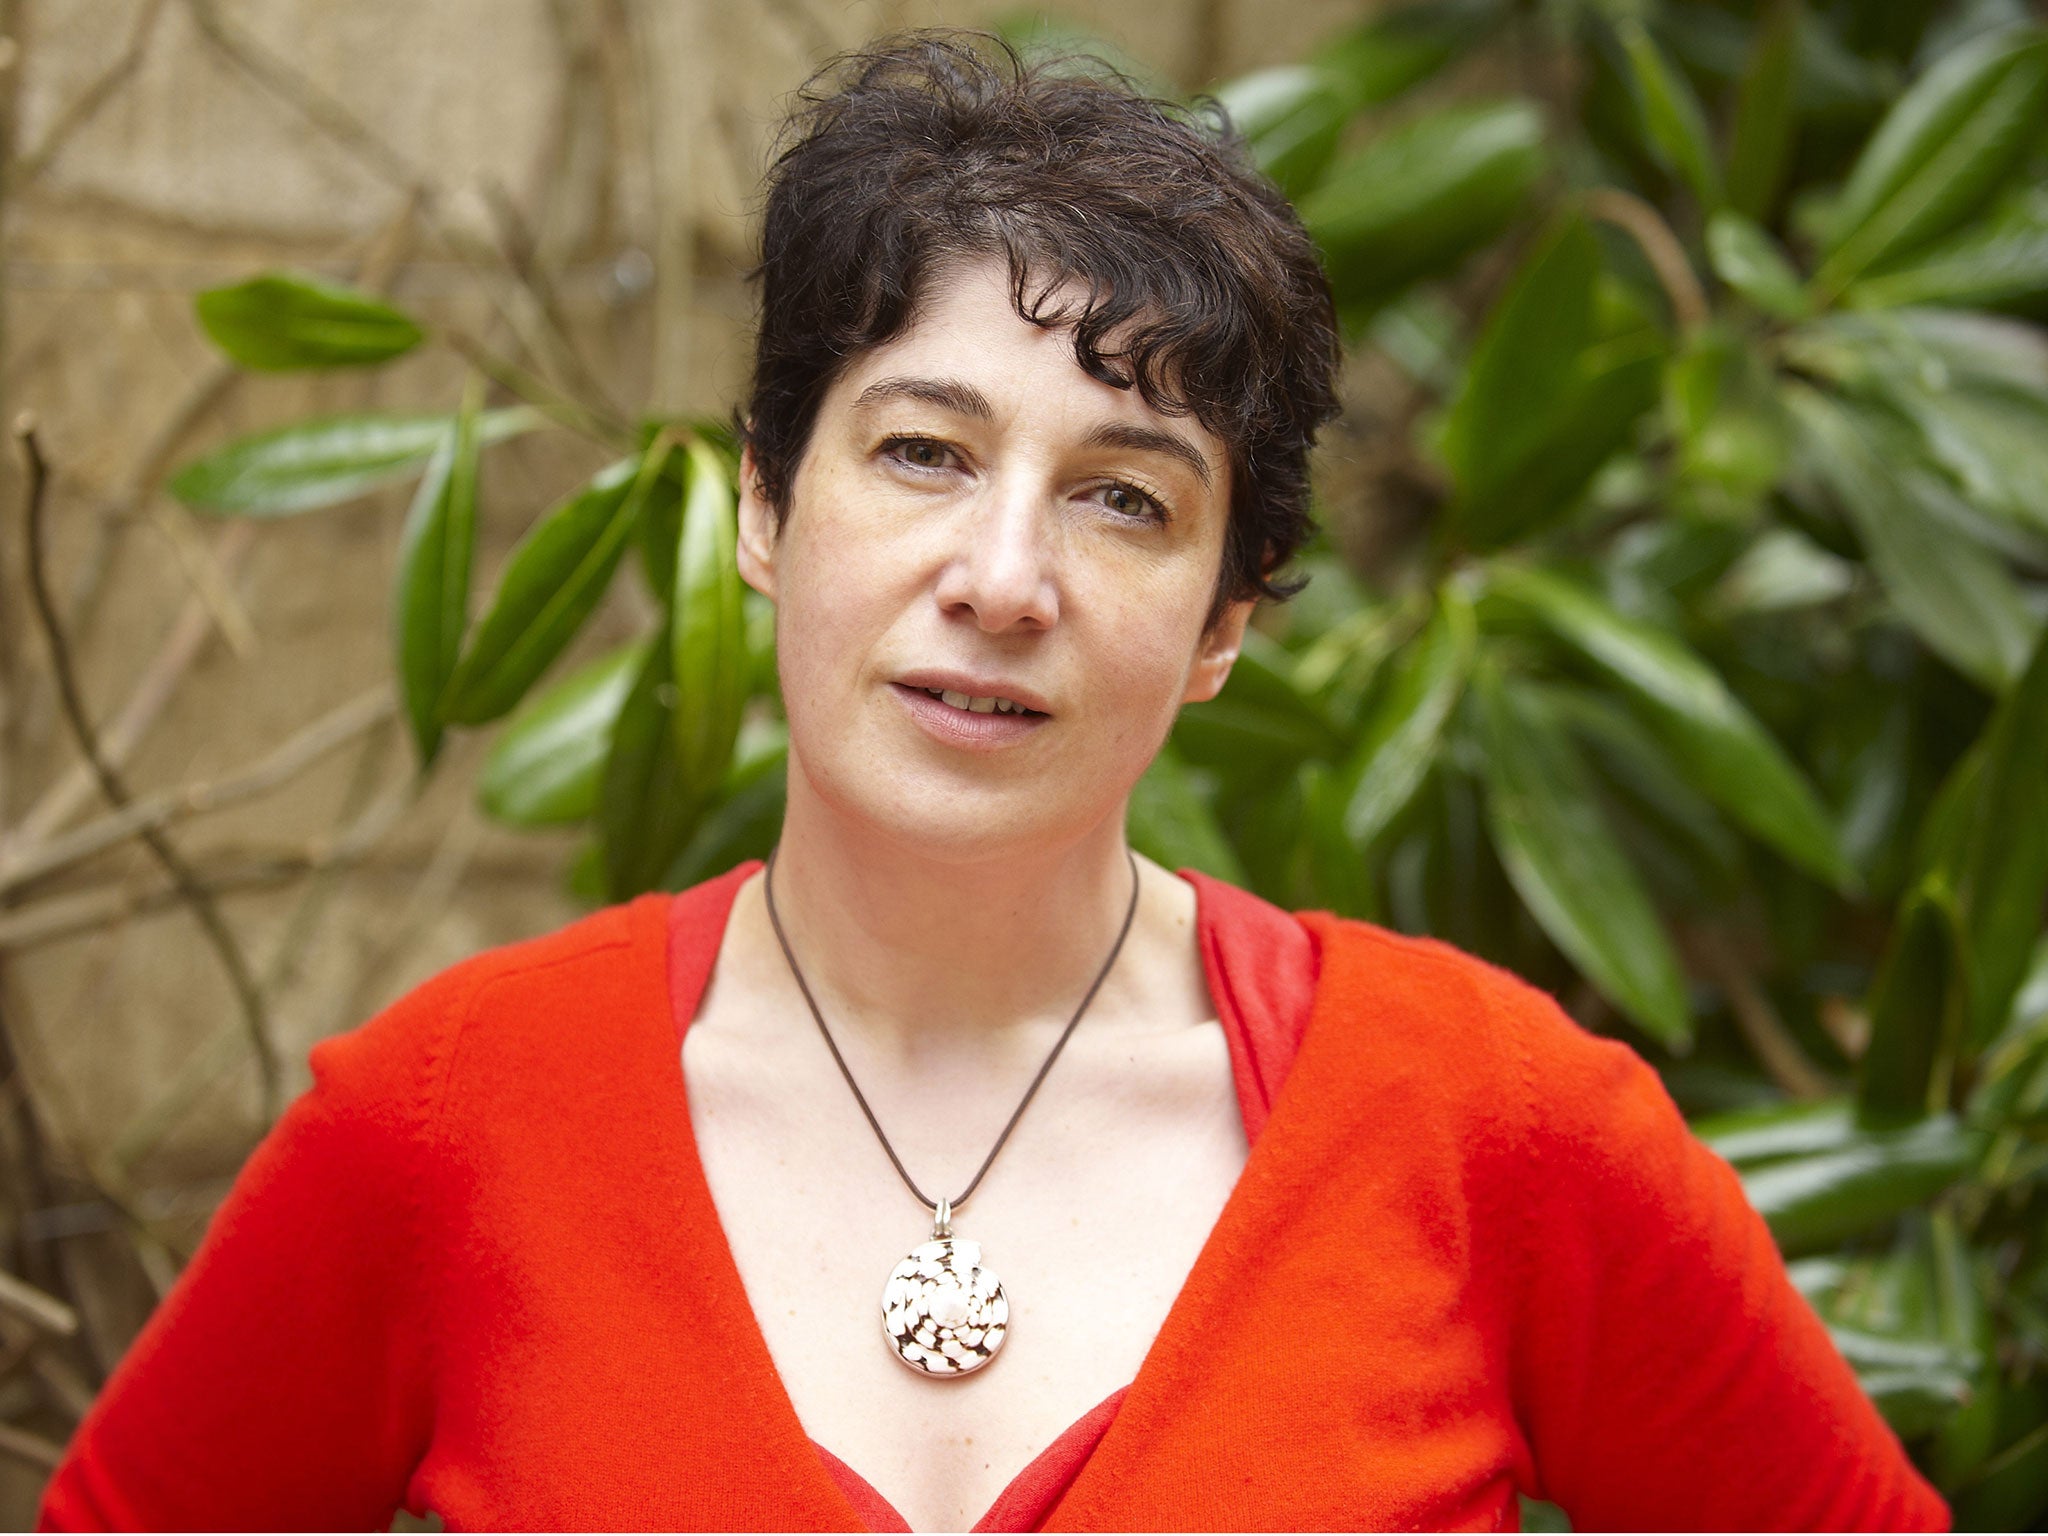 Joanne Harris, author of Chocolat and Blackberry Wine, wrote a blog post attacking the app and questioning its apparent 'strong Christian bias'